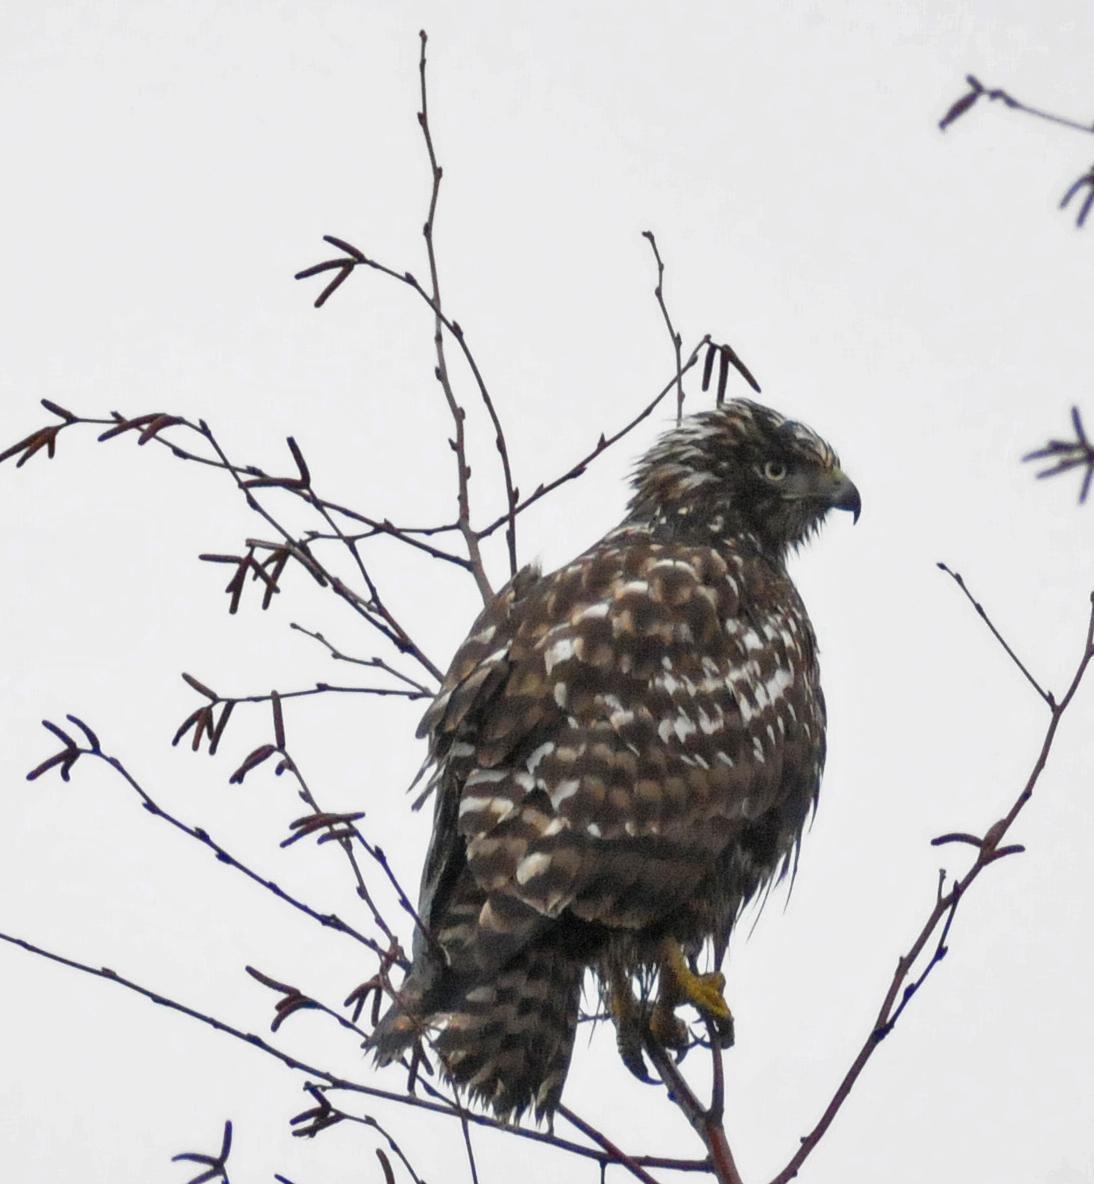 Red-tailed Hawk (Harlan's) Photo by Steven Mlodinow